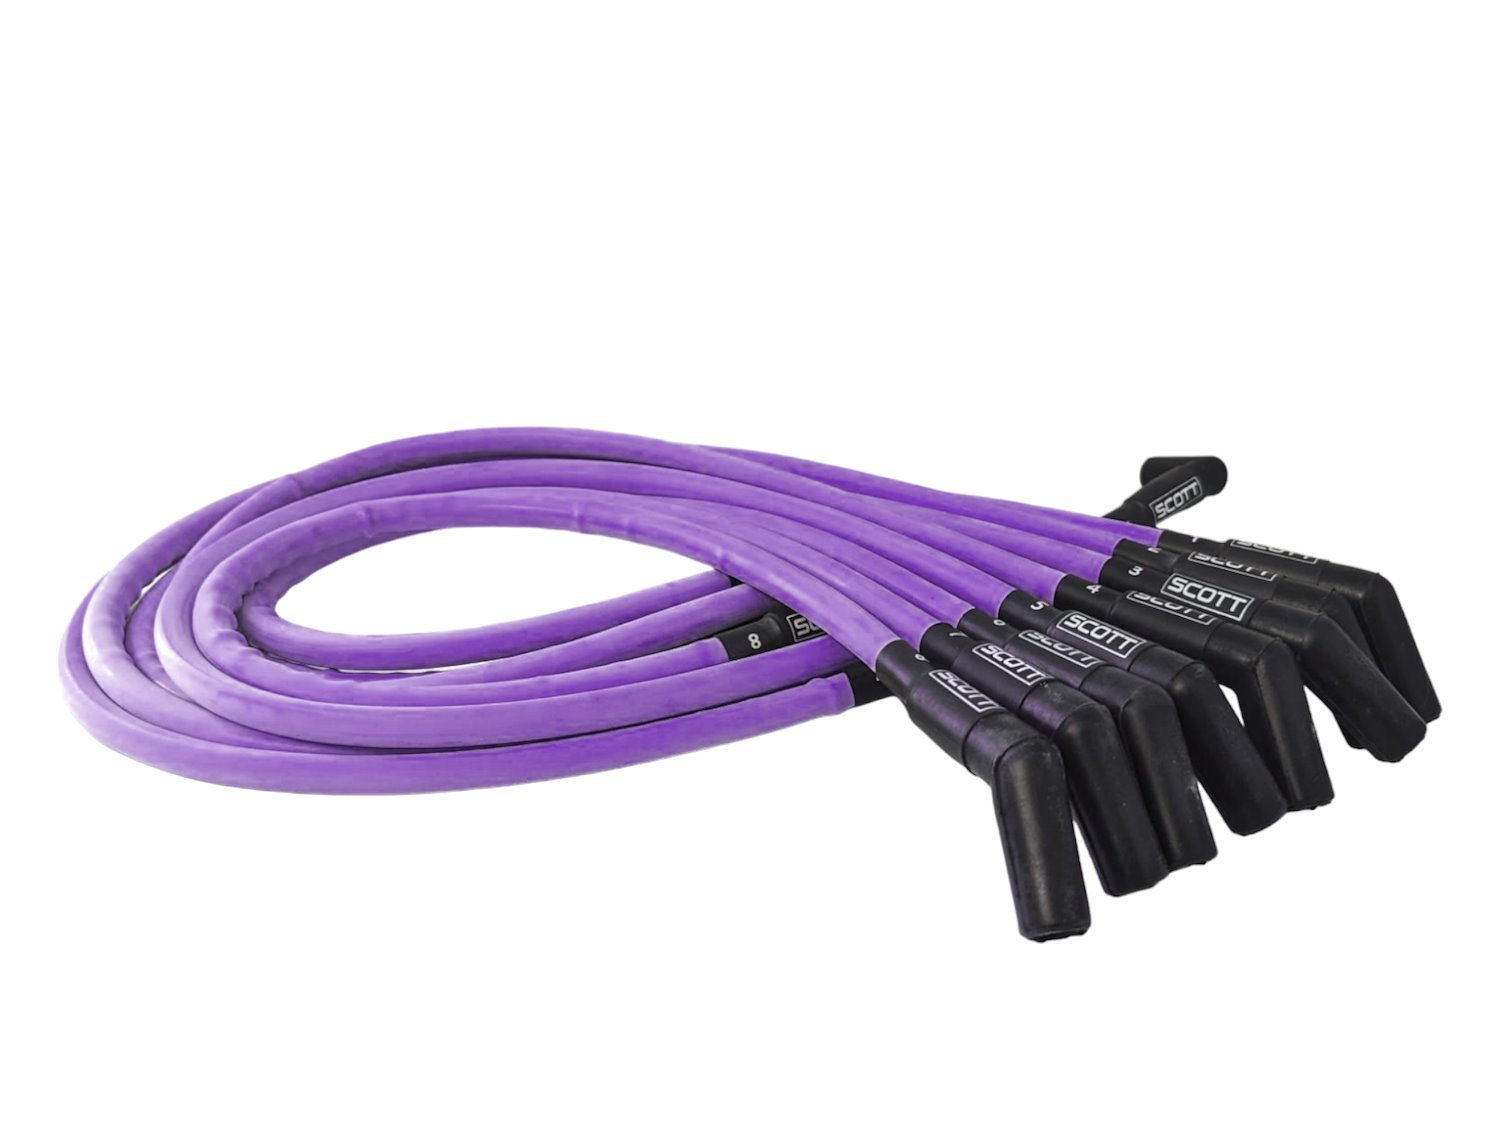 SPW300-CH-429-6 Super Mag Fiberglass-Oversleeved Spark Plug Wire Set for Big Block Ford, Over Valve Cover [Purple]